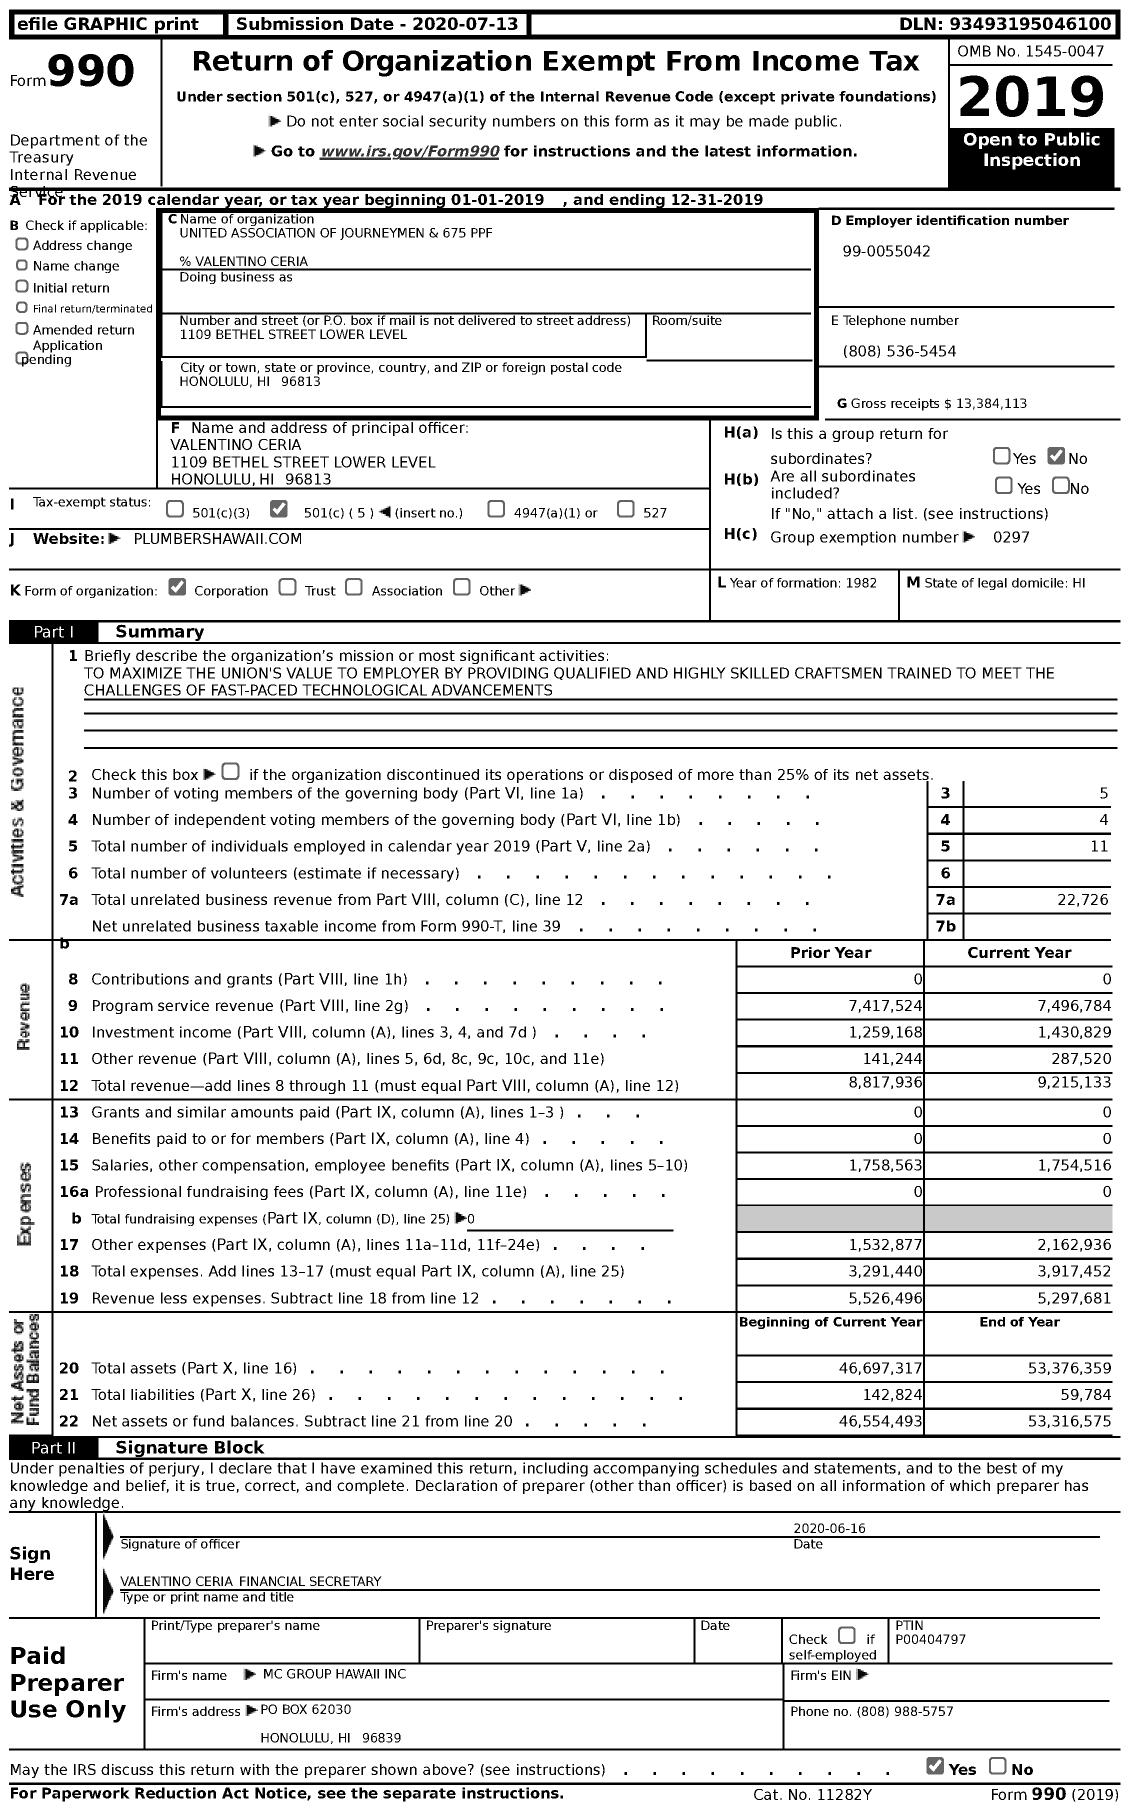 Image of first page of 2019 Form 990 for United Association of Journeymen and 675 PPF